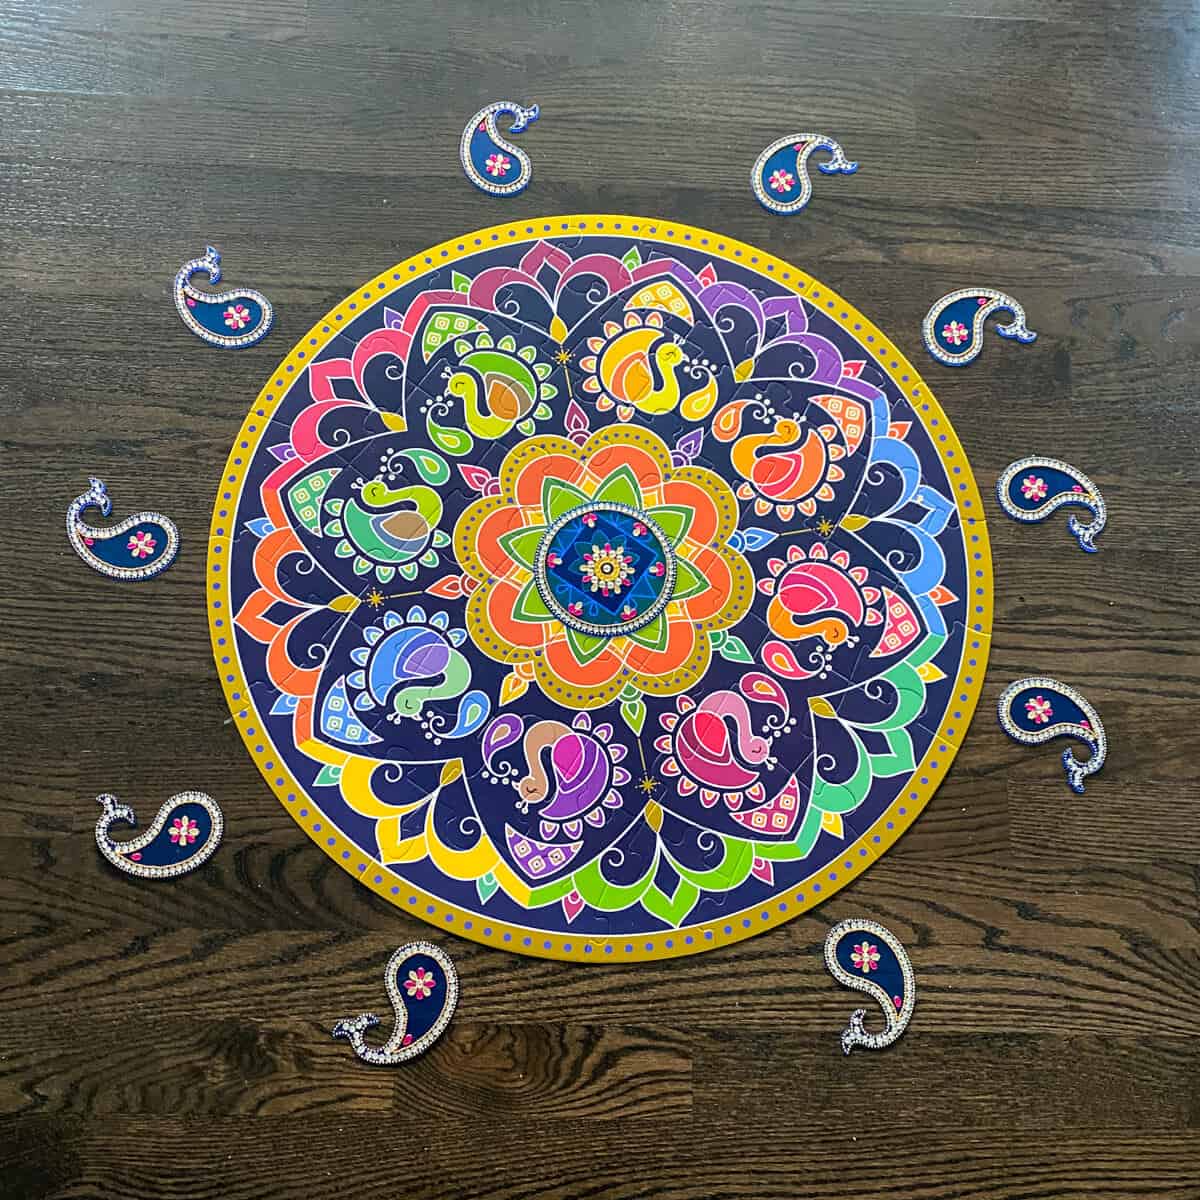 A colorful rangoli made from a puzzle